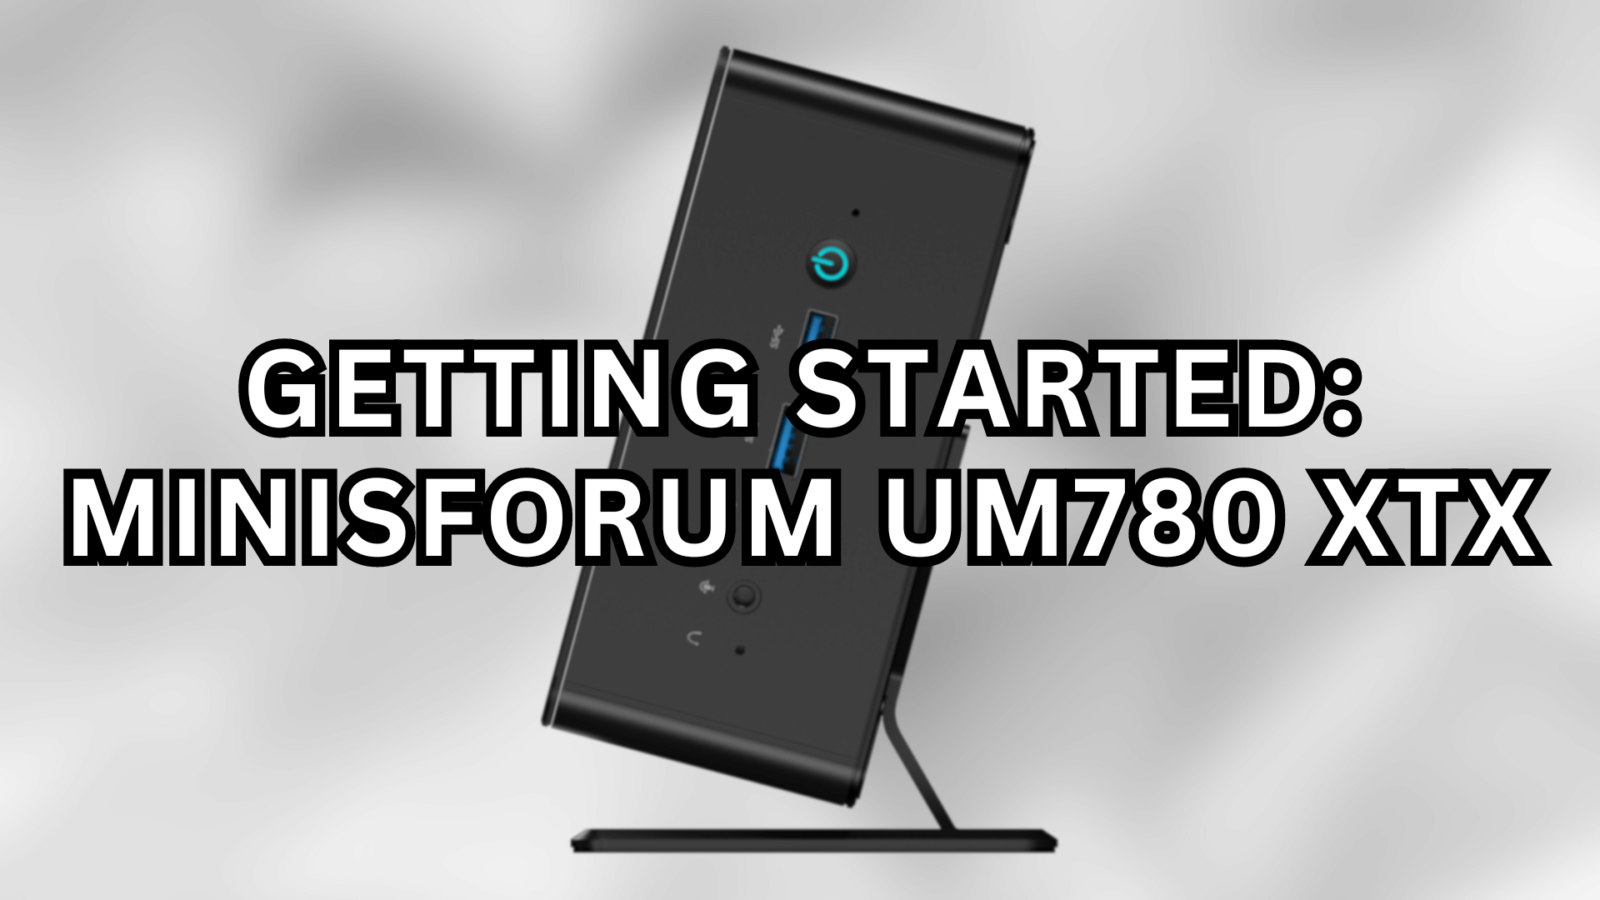 Getting Started with the Minisforum UM780 XTX • DroiX Knowledge Base -  Tutorials for Everything